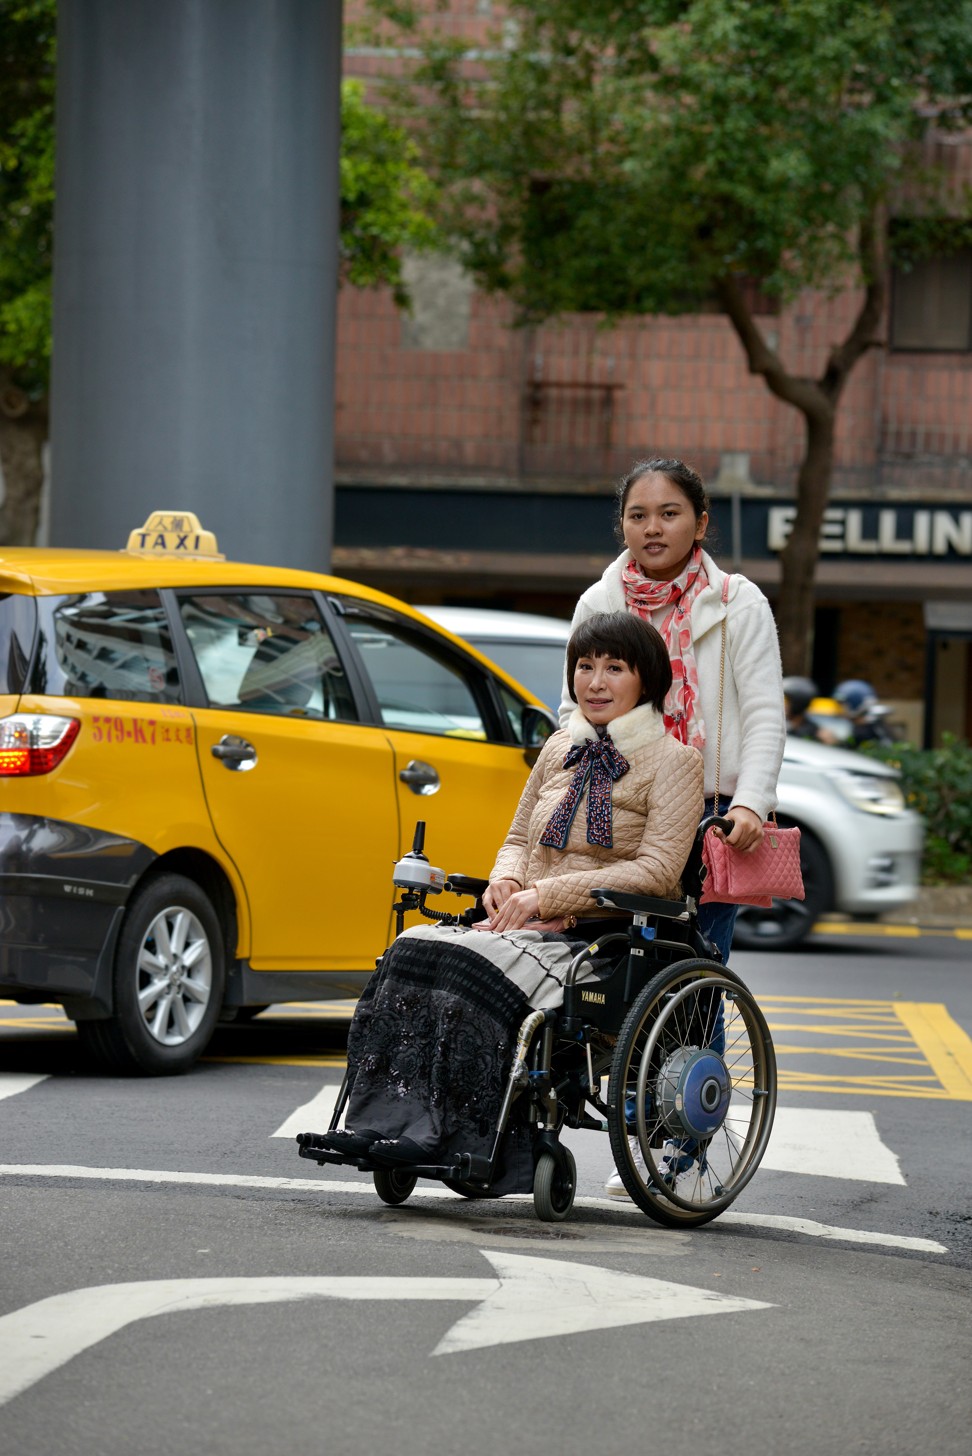 Yang’s assistant helps her cross a road in Taipei in her wheelchair. Photo: Chris Stowers